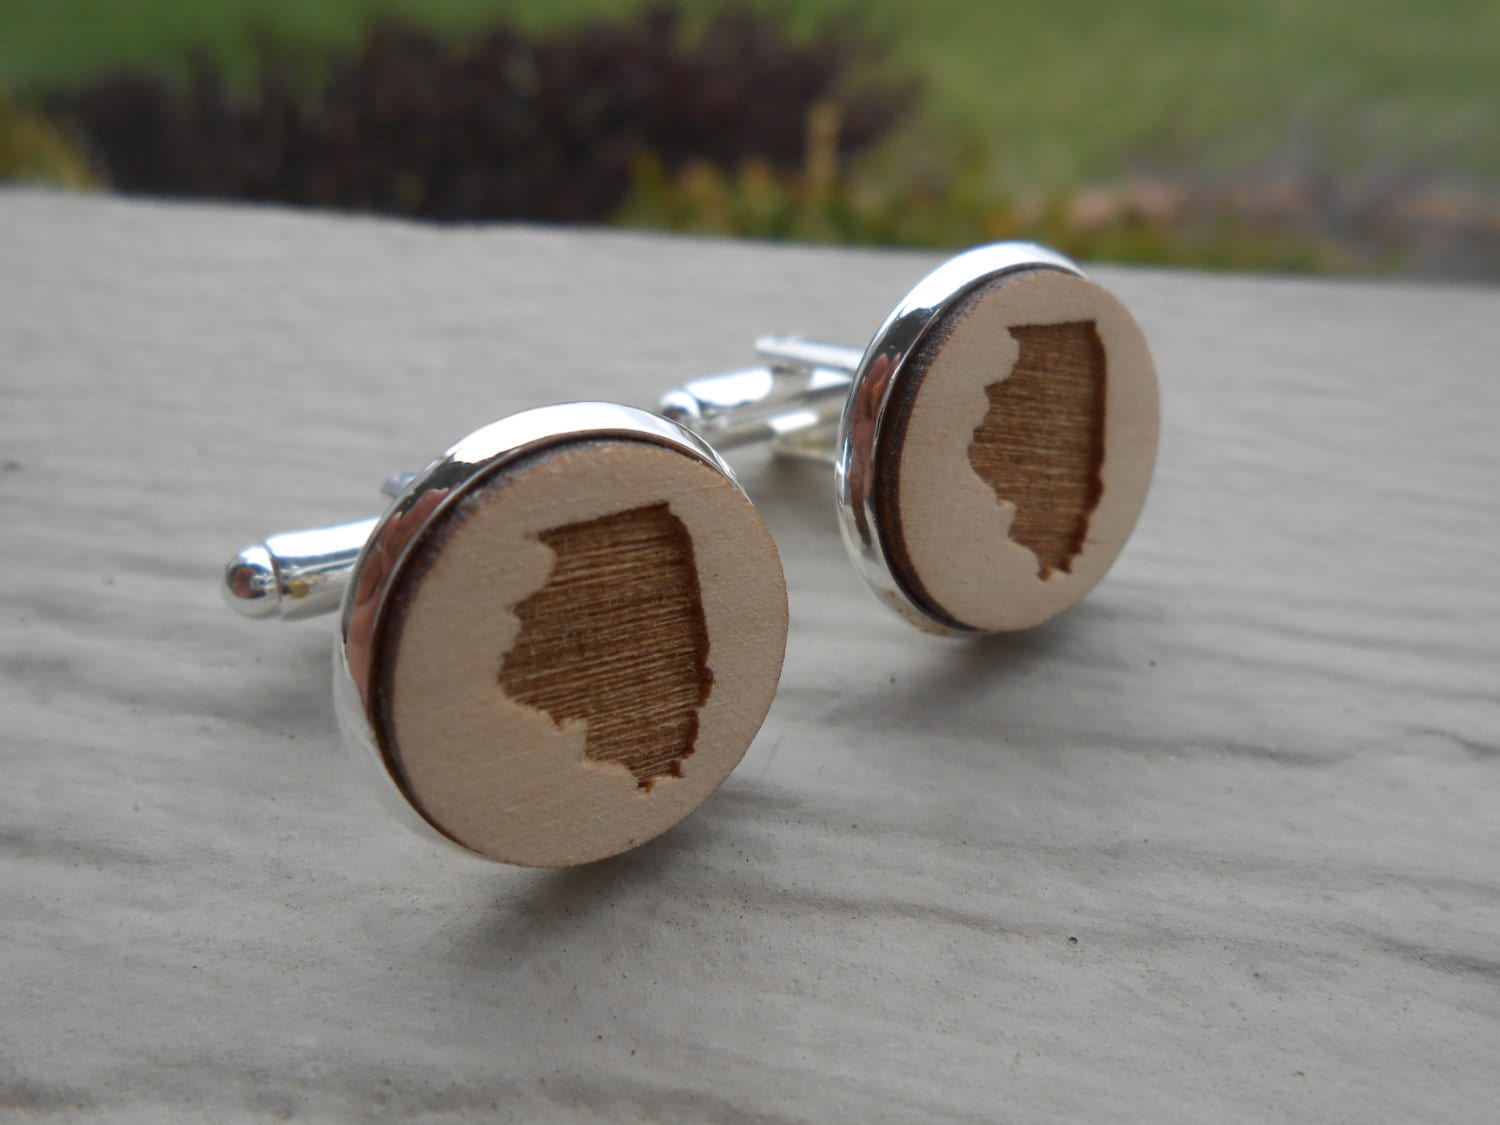 Cufflinks Illinois coin men United States Coin Collector Gifts,Dad Coin  Gift,Upcycled,mens gift accessories jewelry